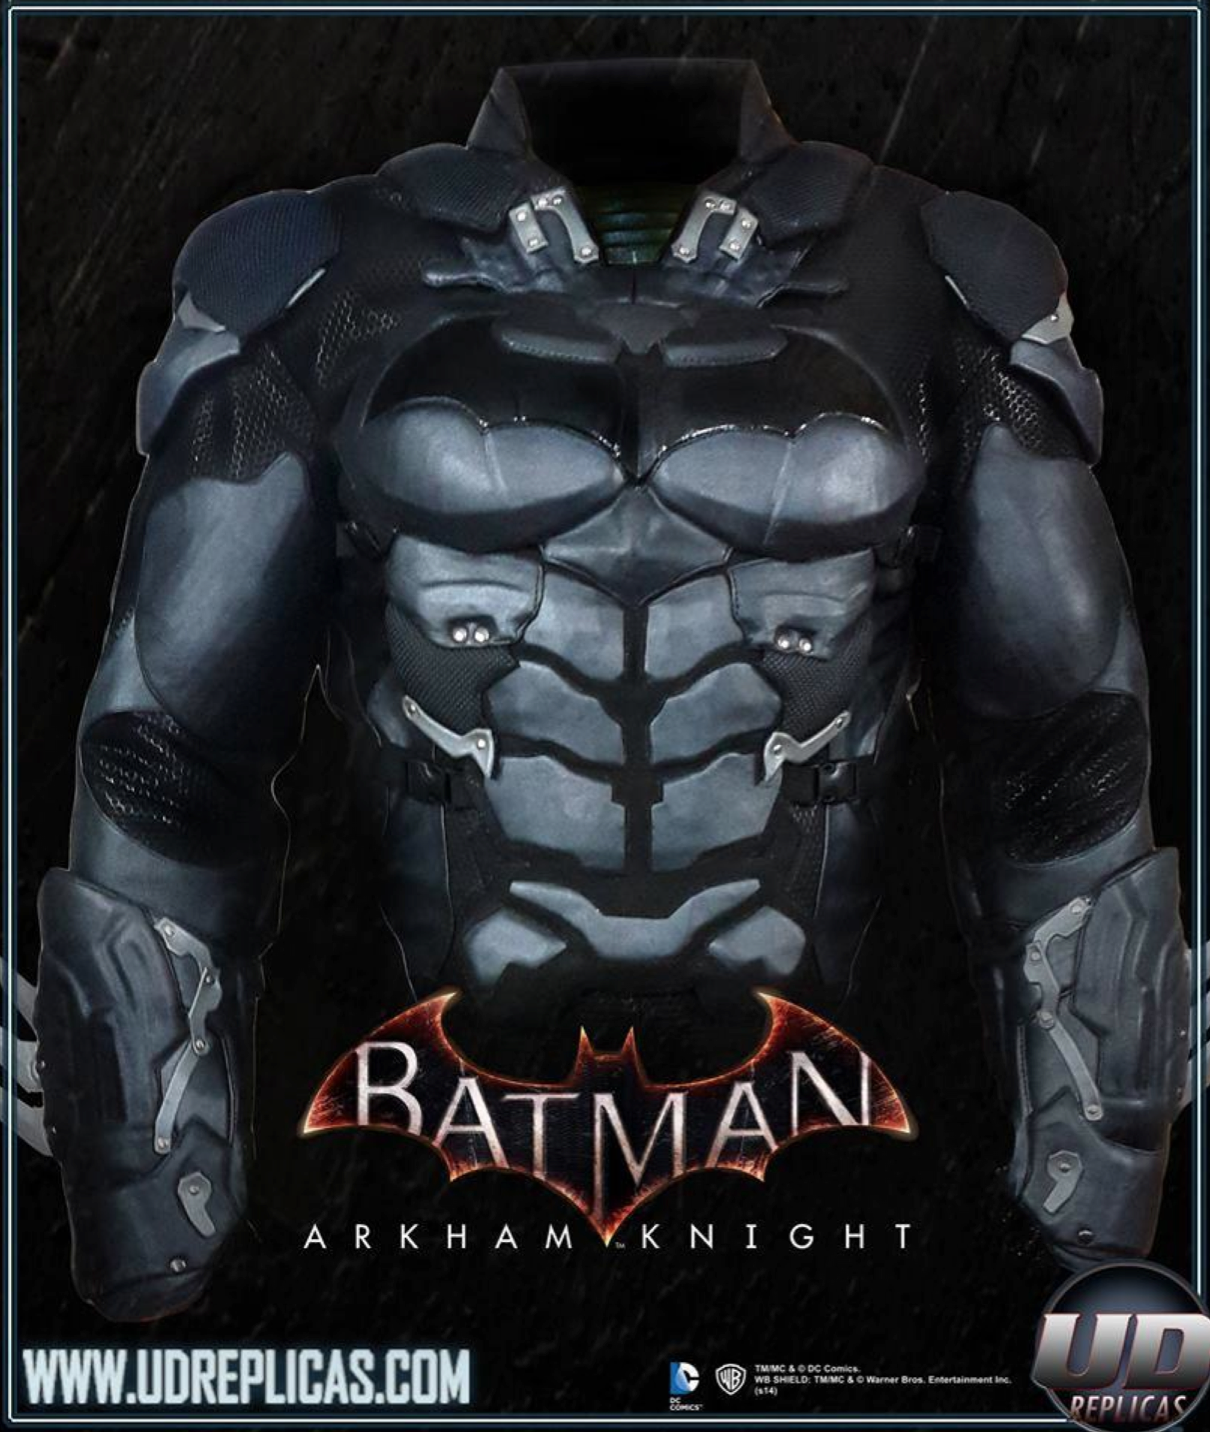 UD Replicas: Arkham Knight Full Suit is coming - Dark Knight News